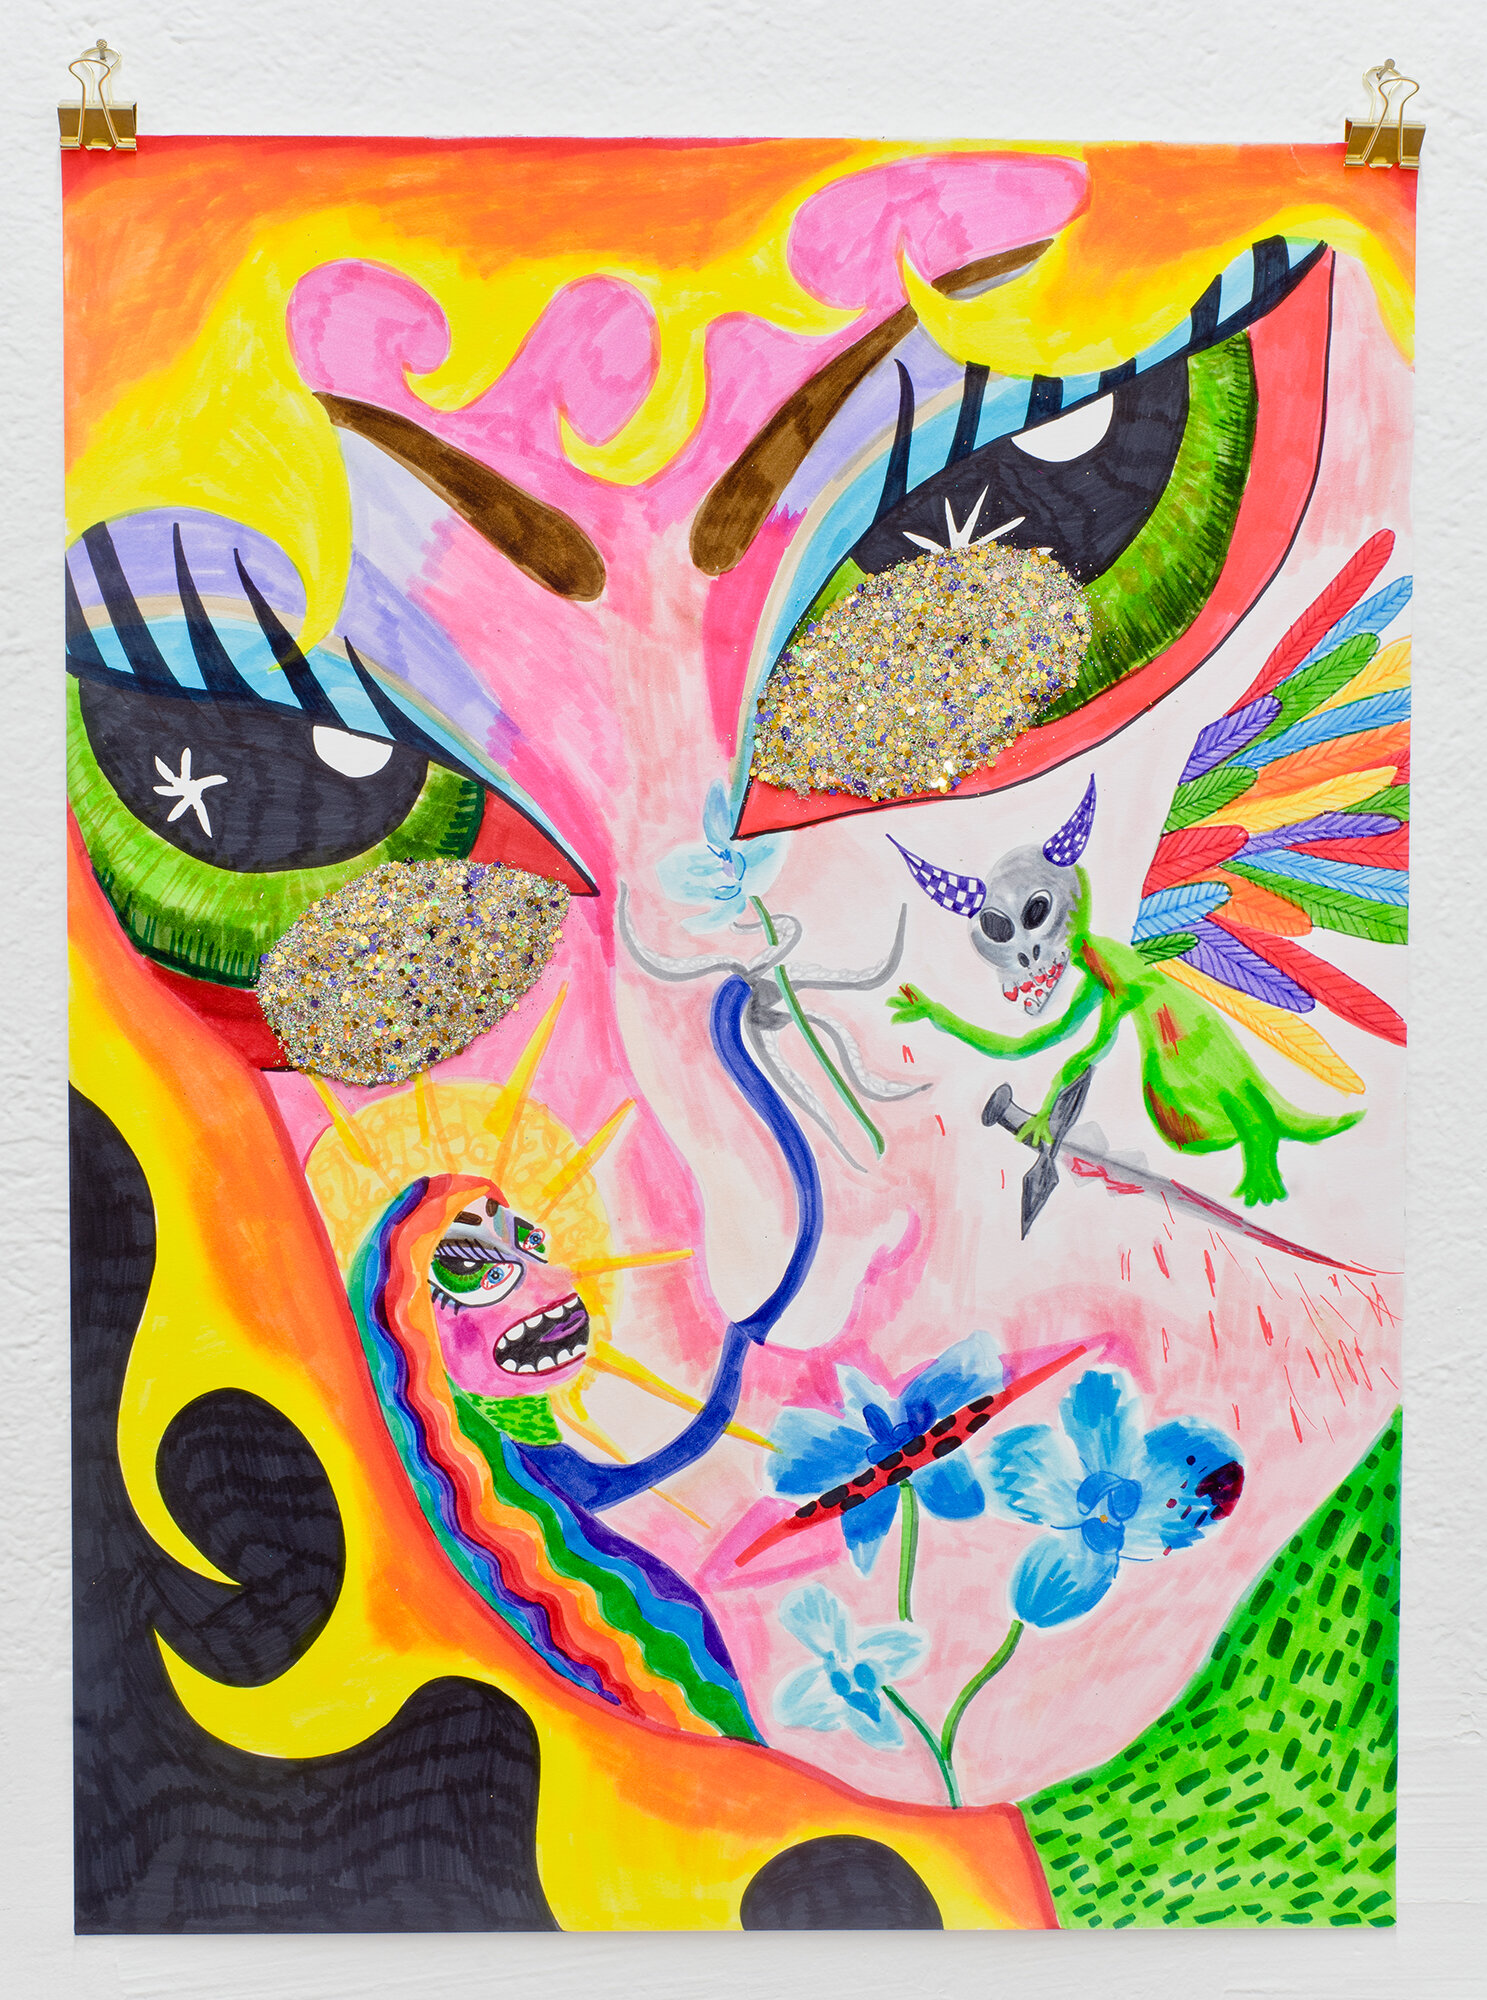   The Monster Wore Annunciation Face Paint,  2017   24 x 18 inches (60.96 x 45.72 cm.)  Colored marker and glitter on paper 